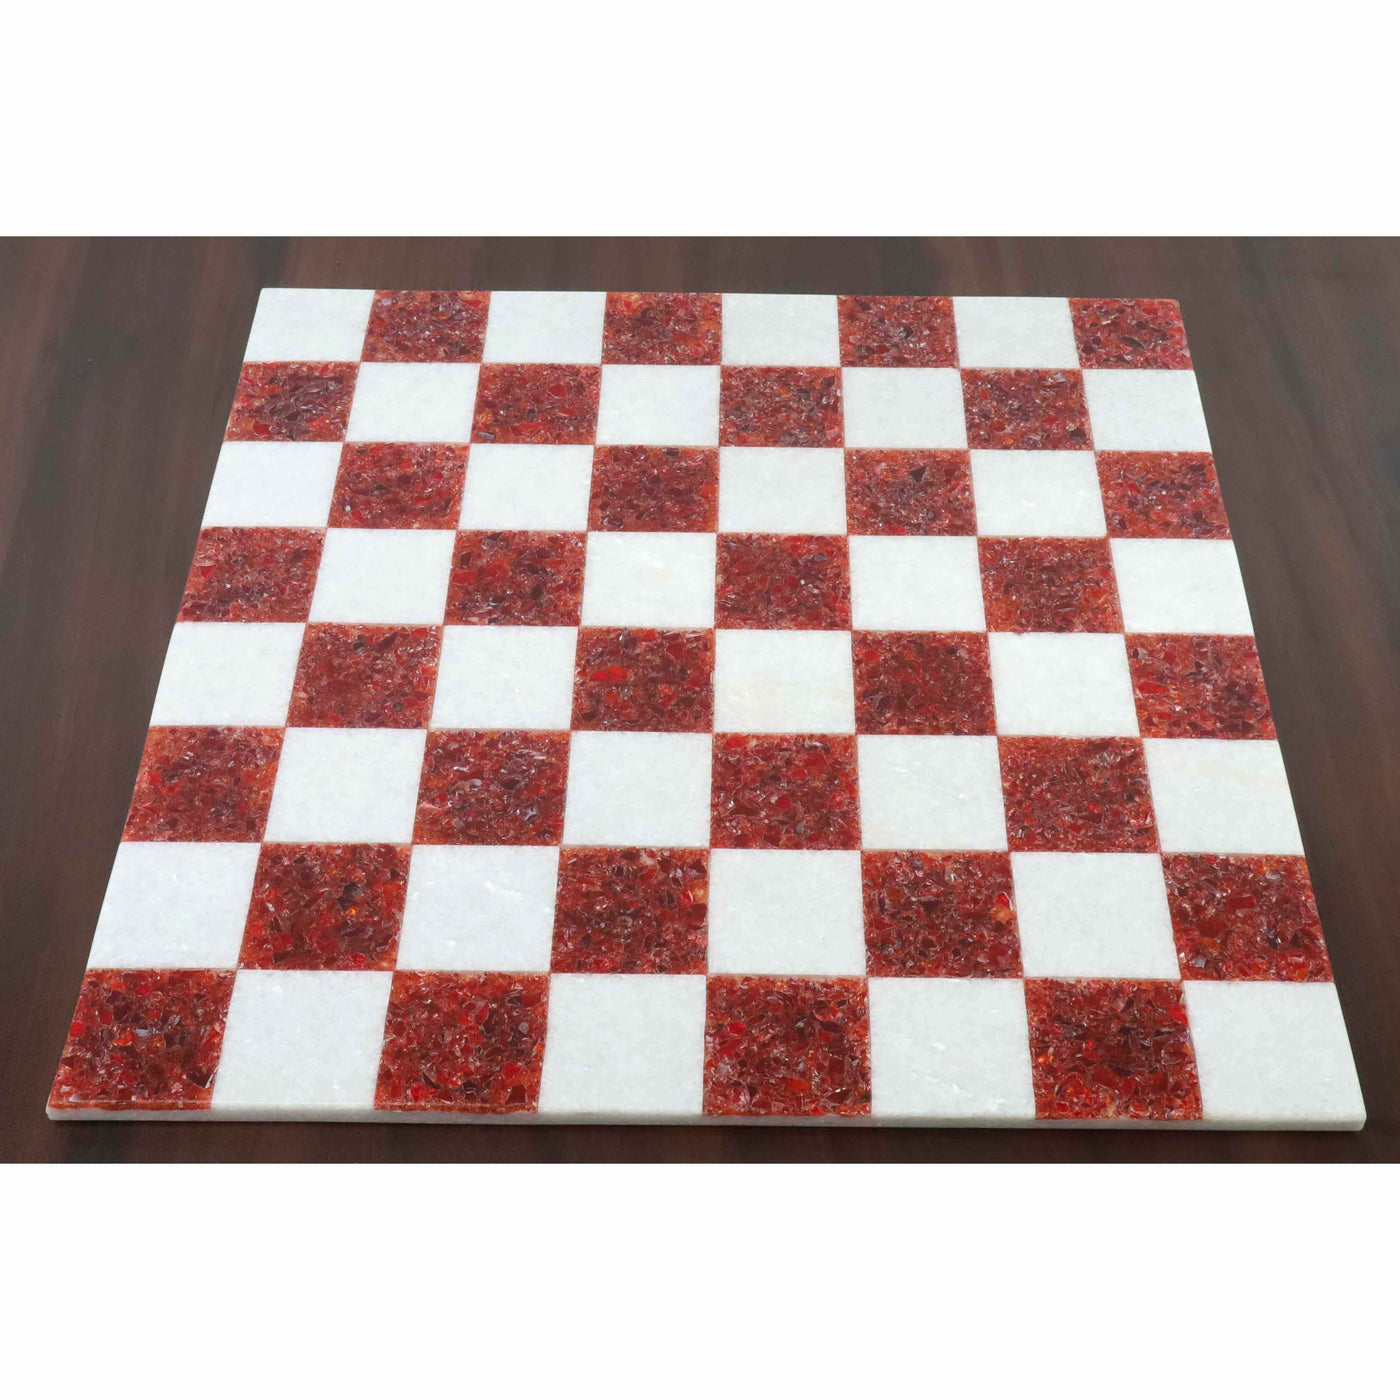 18'' Borderless Marble Stone Luxury Chess Board - Red and White Stone